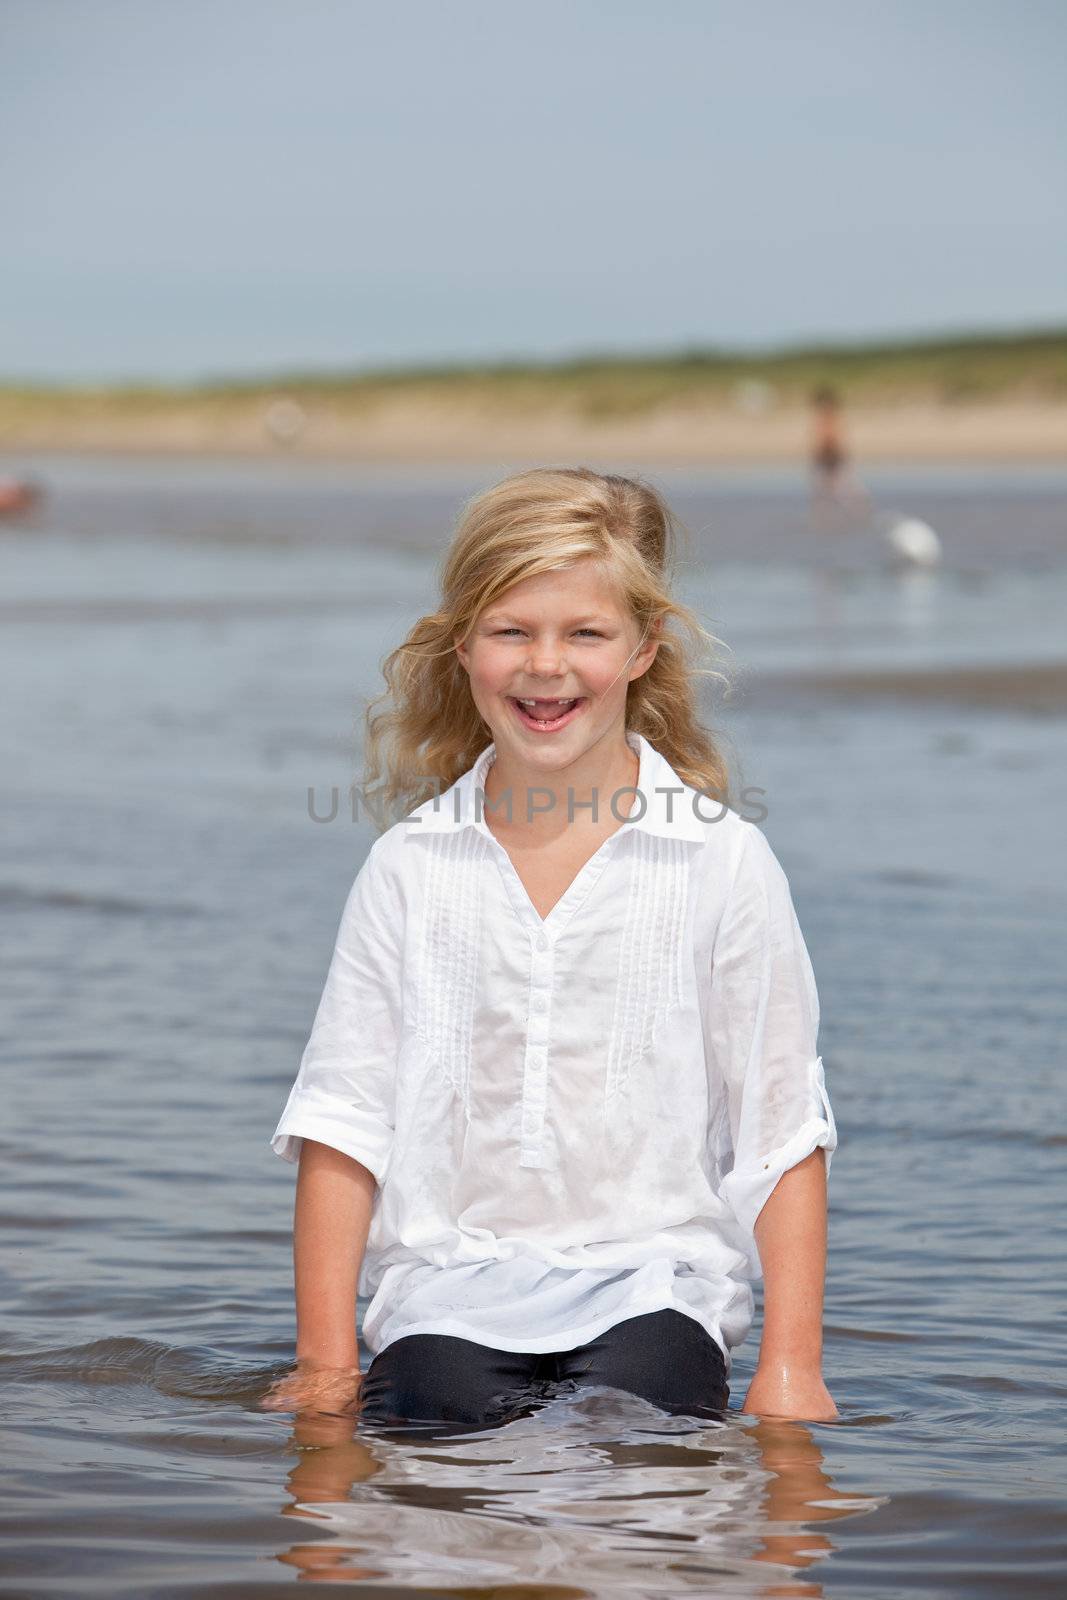 Cute young child looking very happy while sitting in the water